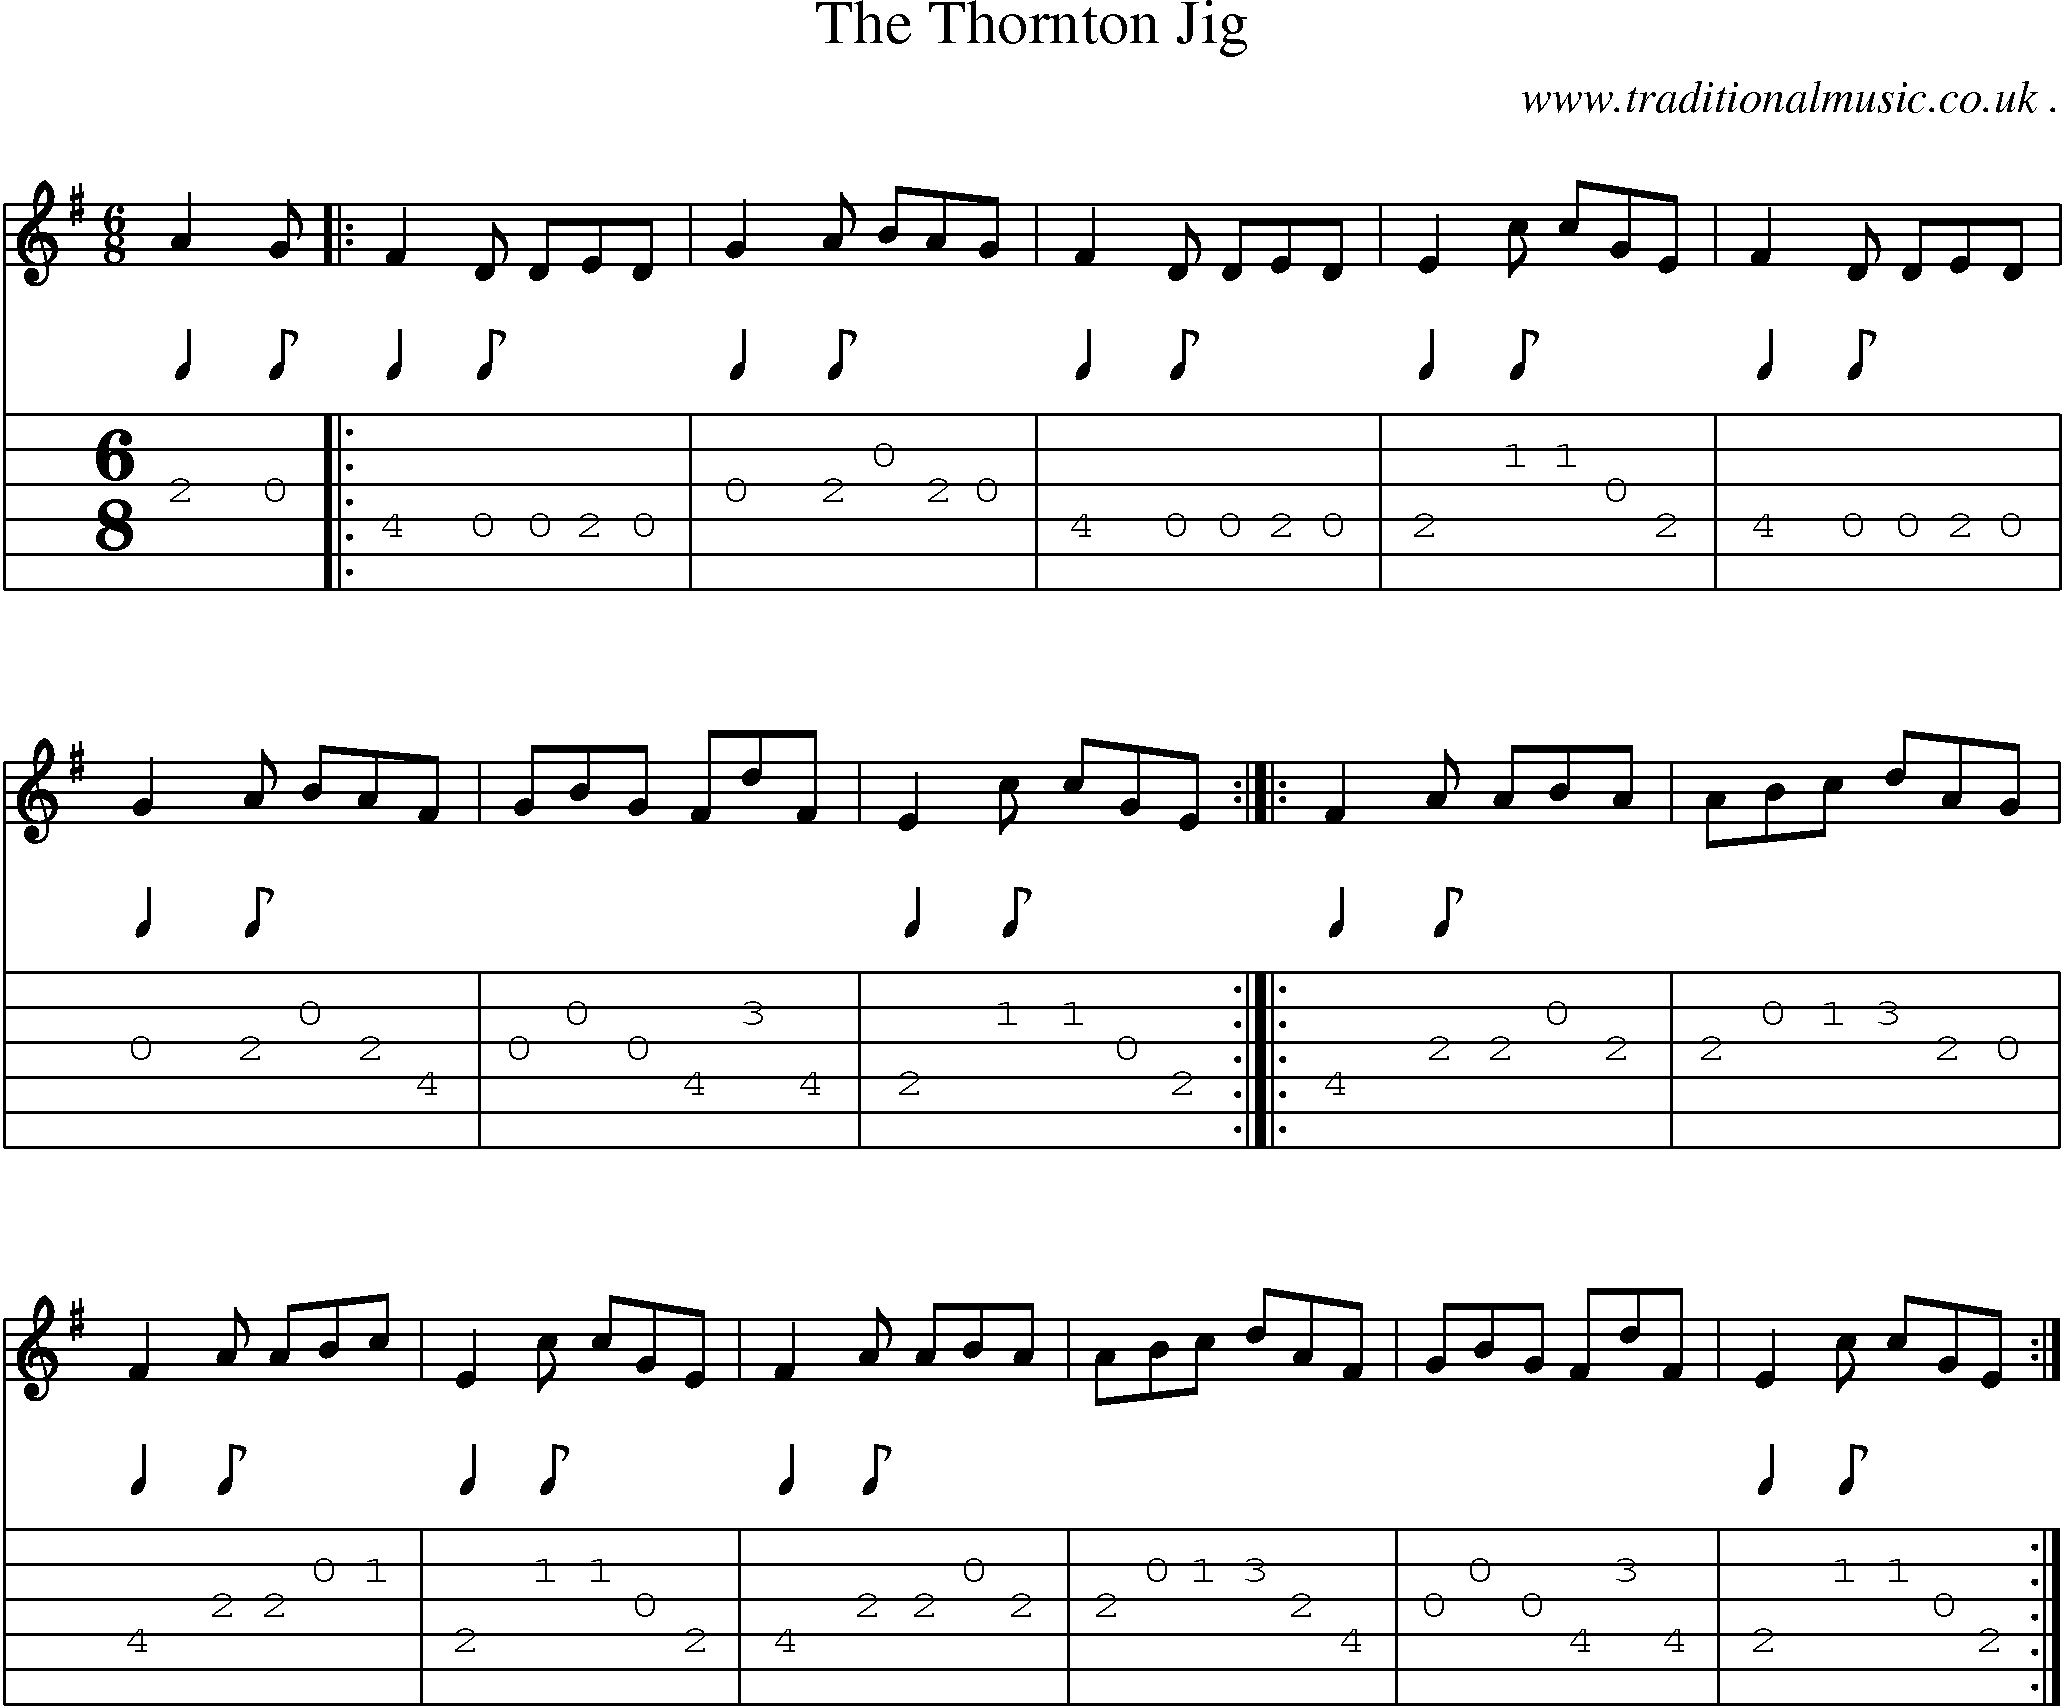 Sheet-music  score, Chords and Guitar Tabs for The Thornton Jig